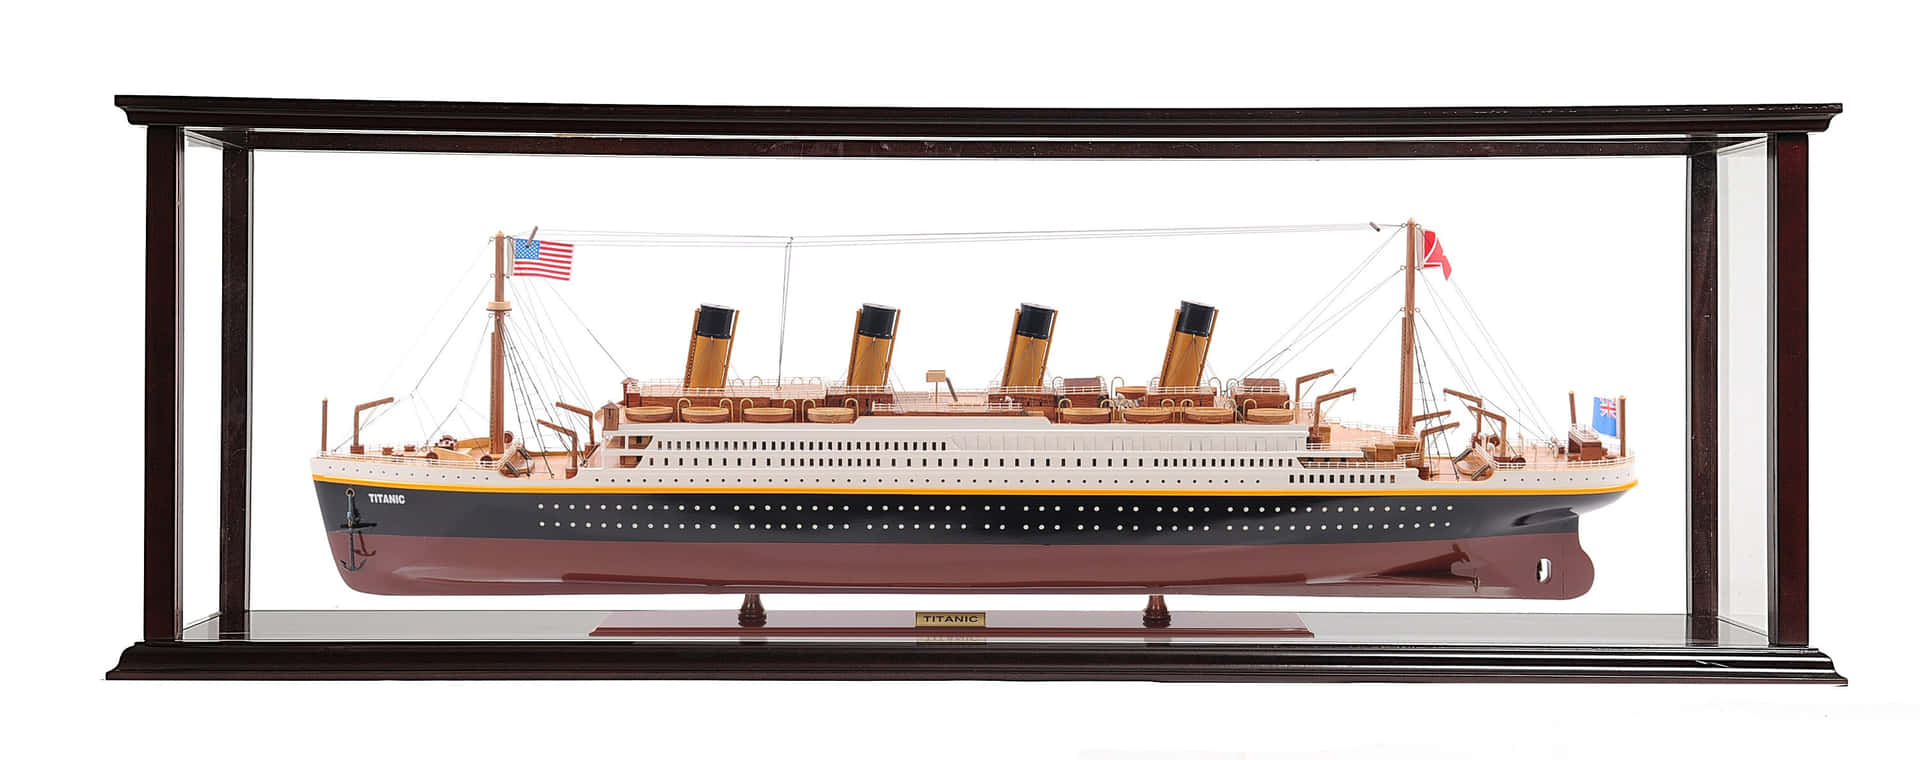 Rms Titanic Museum Model In Glass Display Background